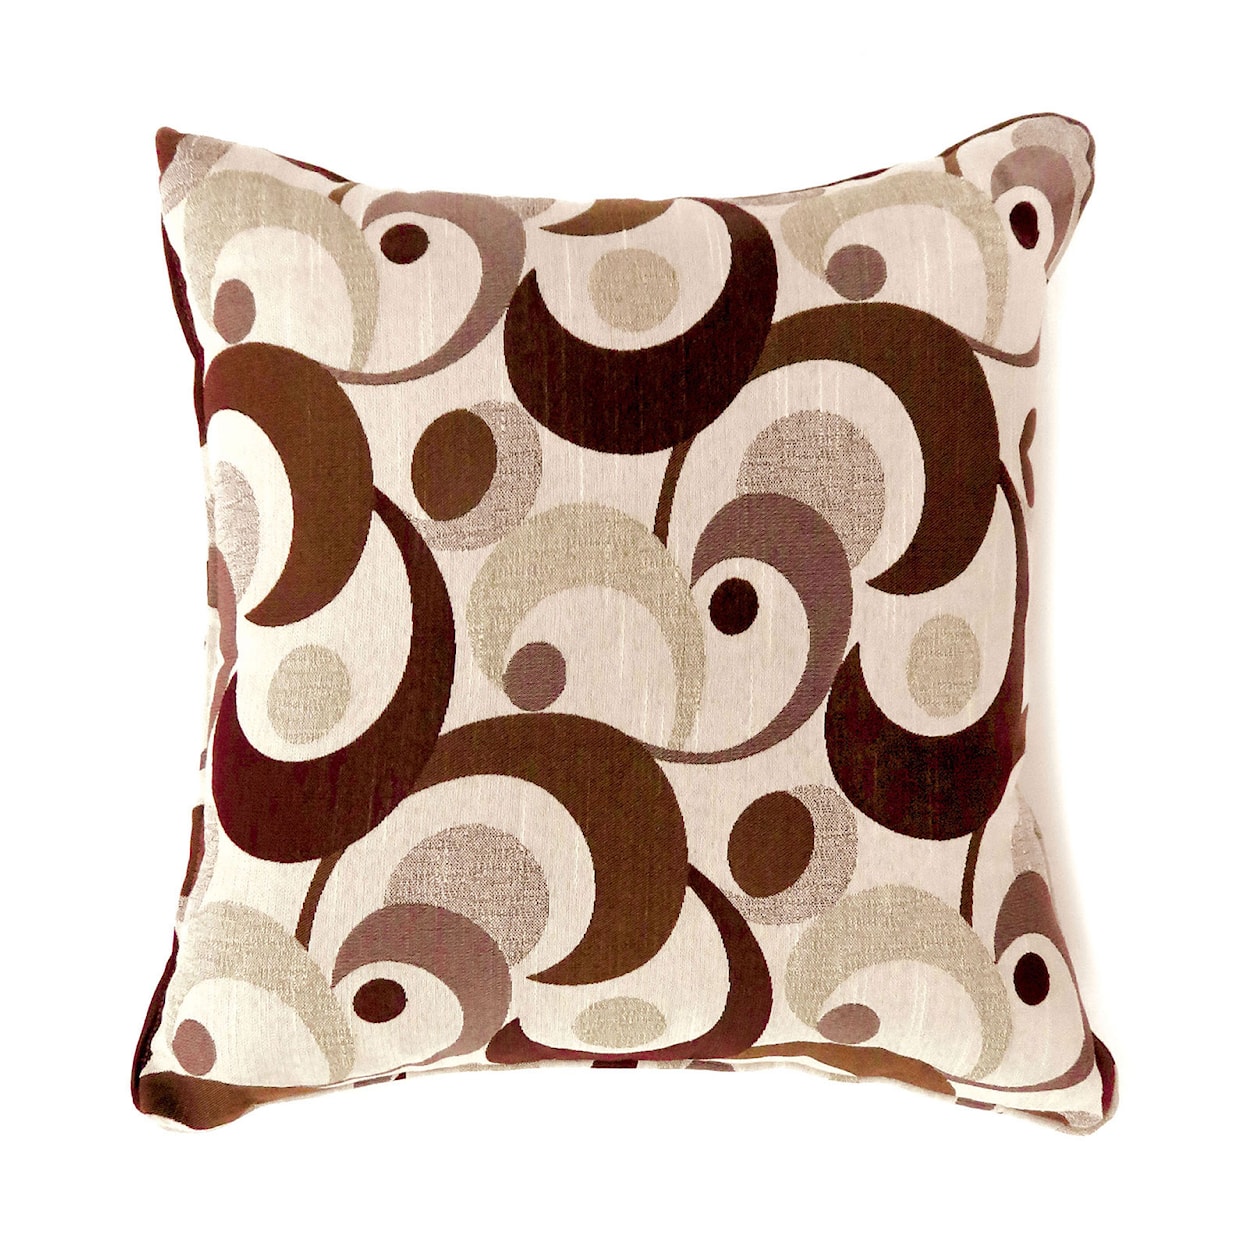 Furniture of America Swoosh Set of Two 22" X 22" Pillows, Brown